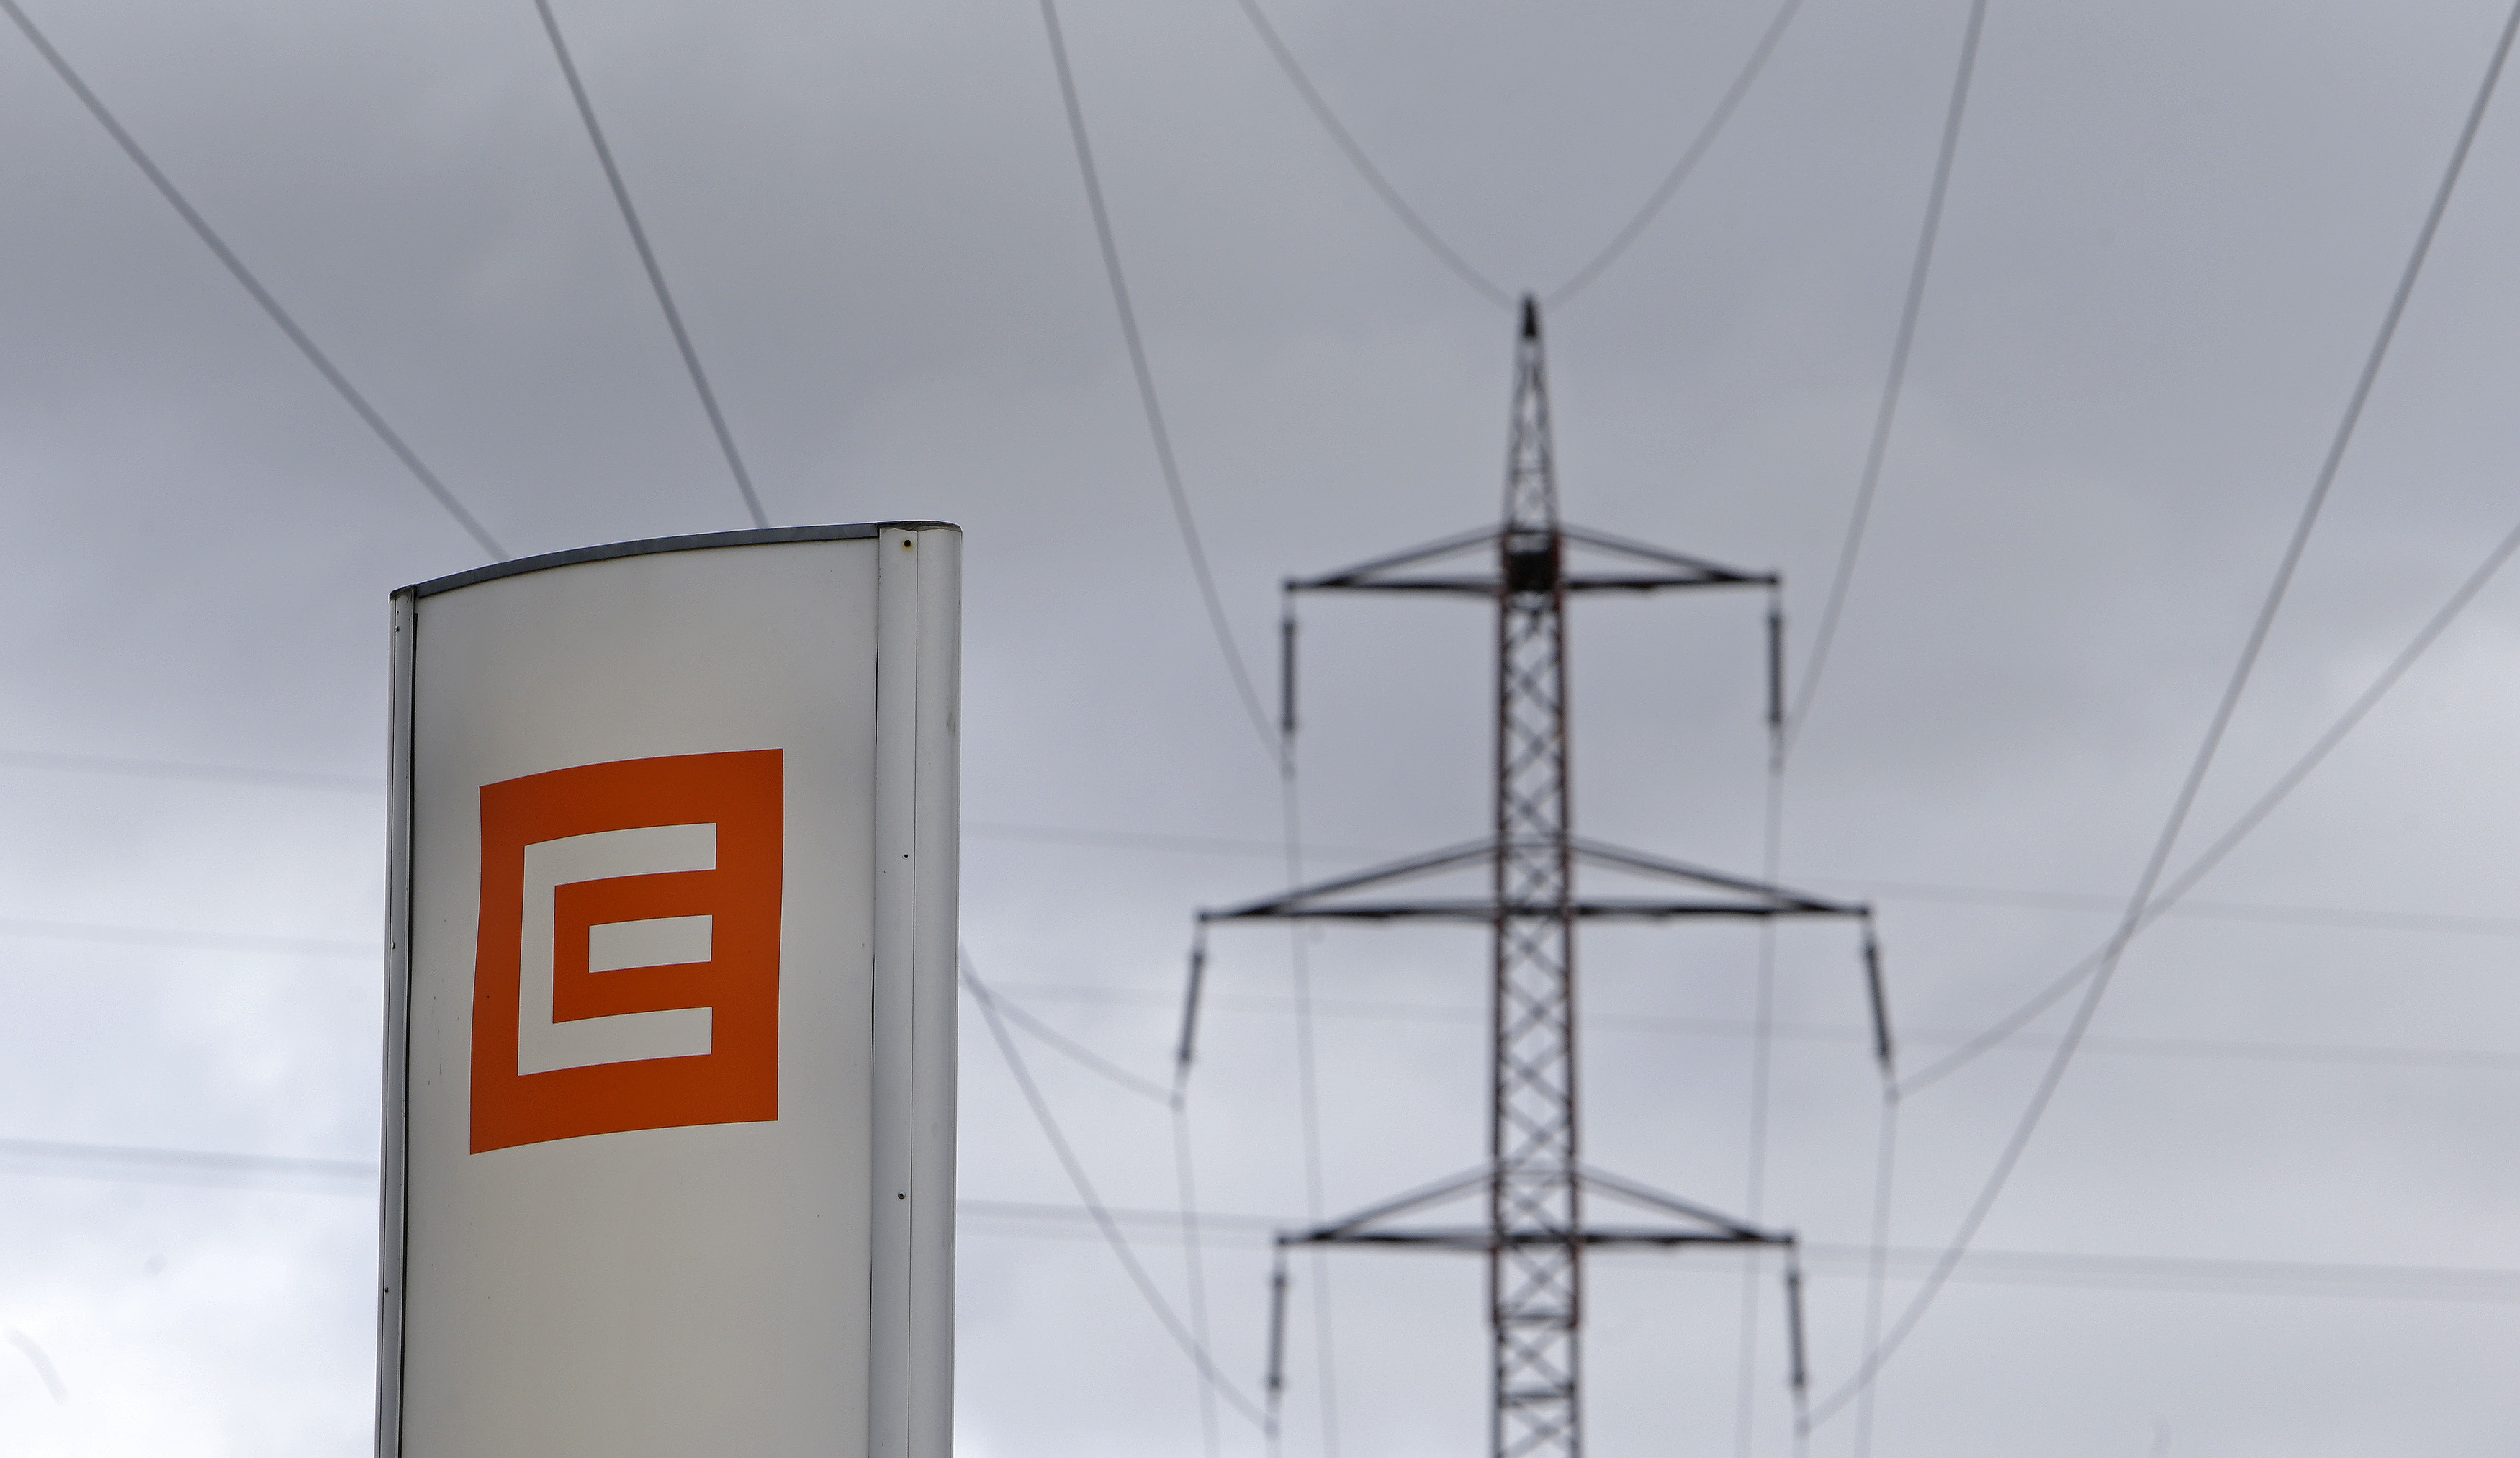 Czech electricity producer CEZ's logo is seen next to an electricity pylon in front of the Ledvice coal-fired power plant near the village of Ledvice